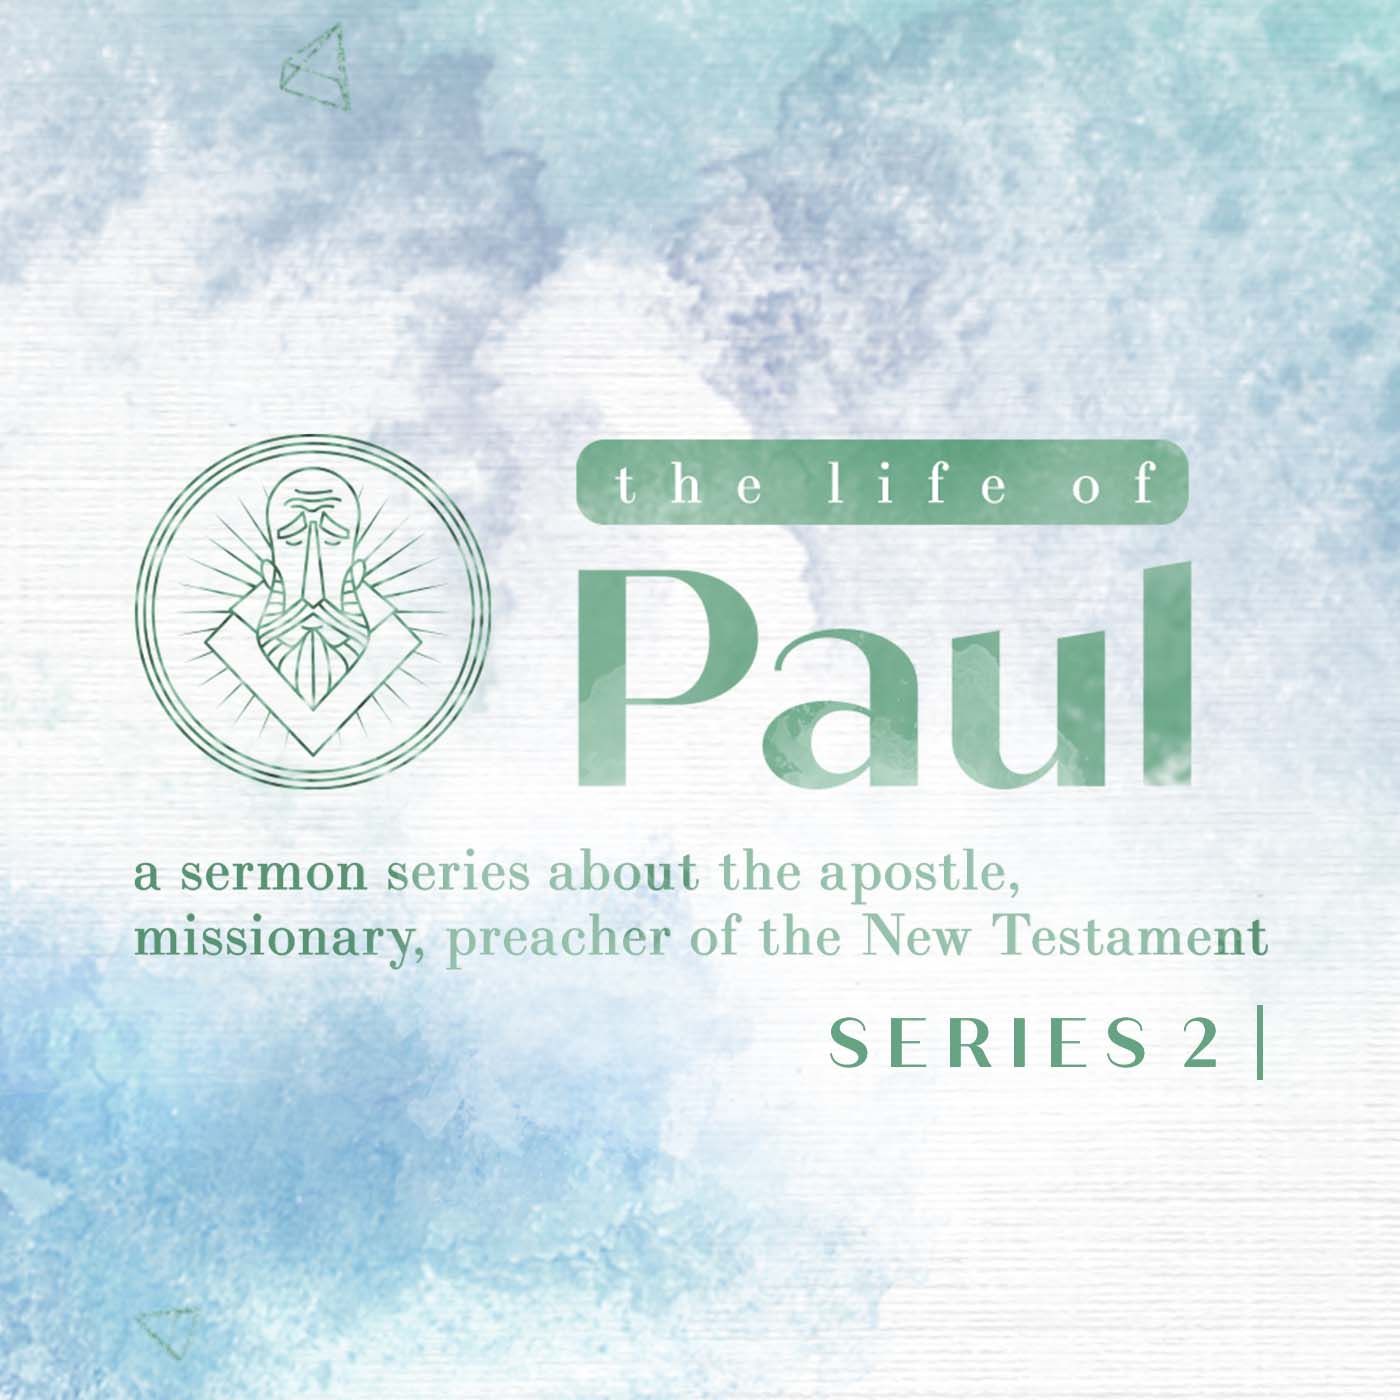 The Life of Paul: Series 2